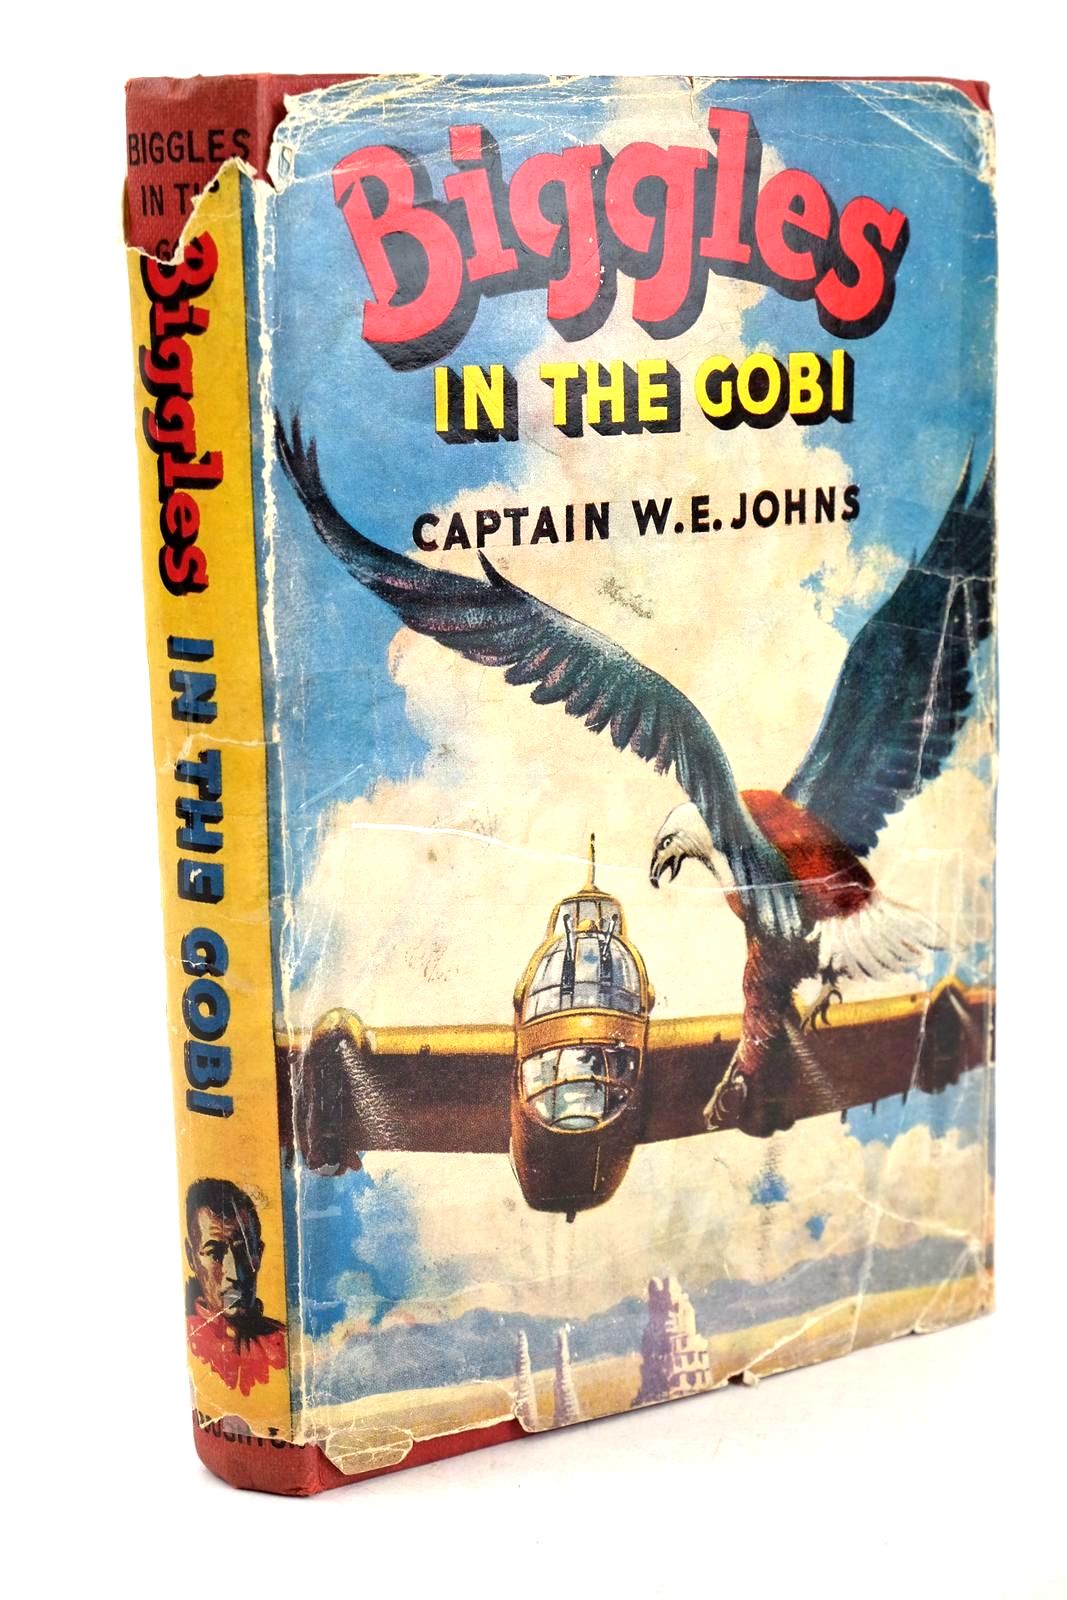 Photo of BIGGLES IN THE GOBI written by Johns, W.E. illustrated by Stead,  published by Hodder &amp; Stoughton (STOCK CODE: 1326619)  for sale by Stella & Rose's Books